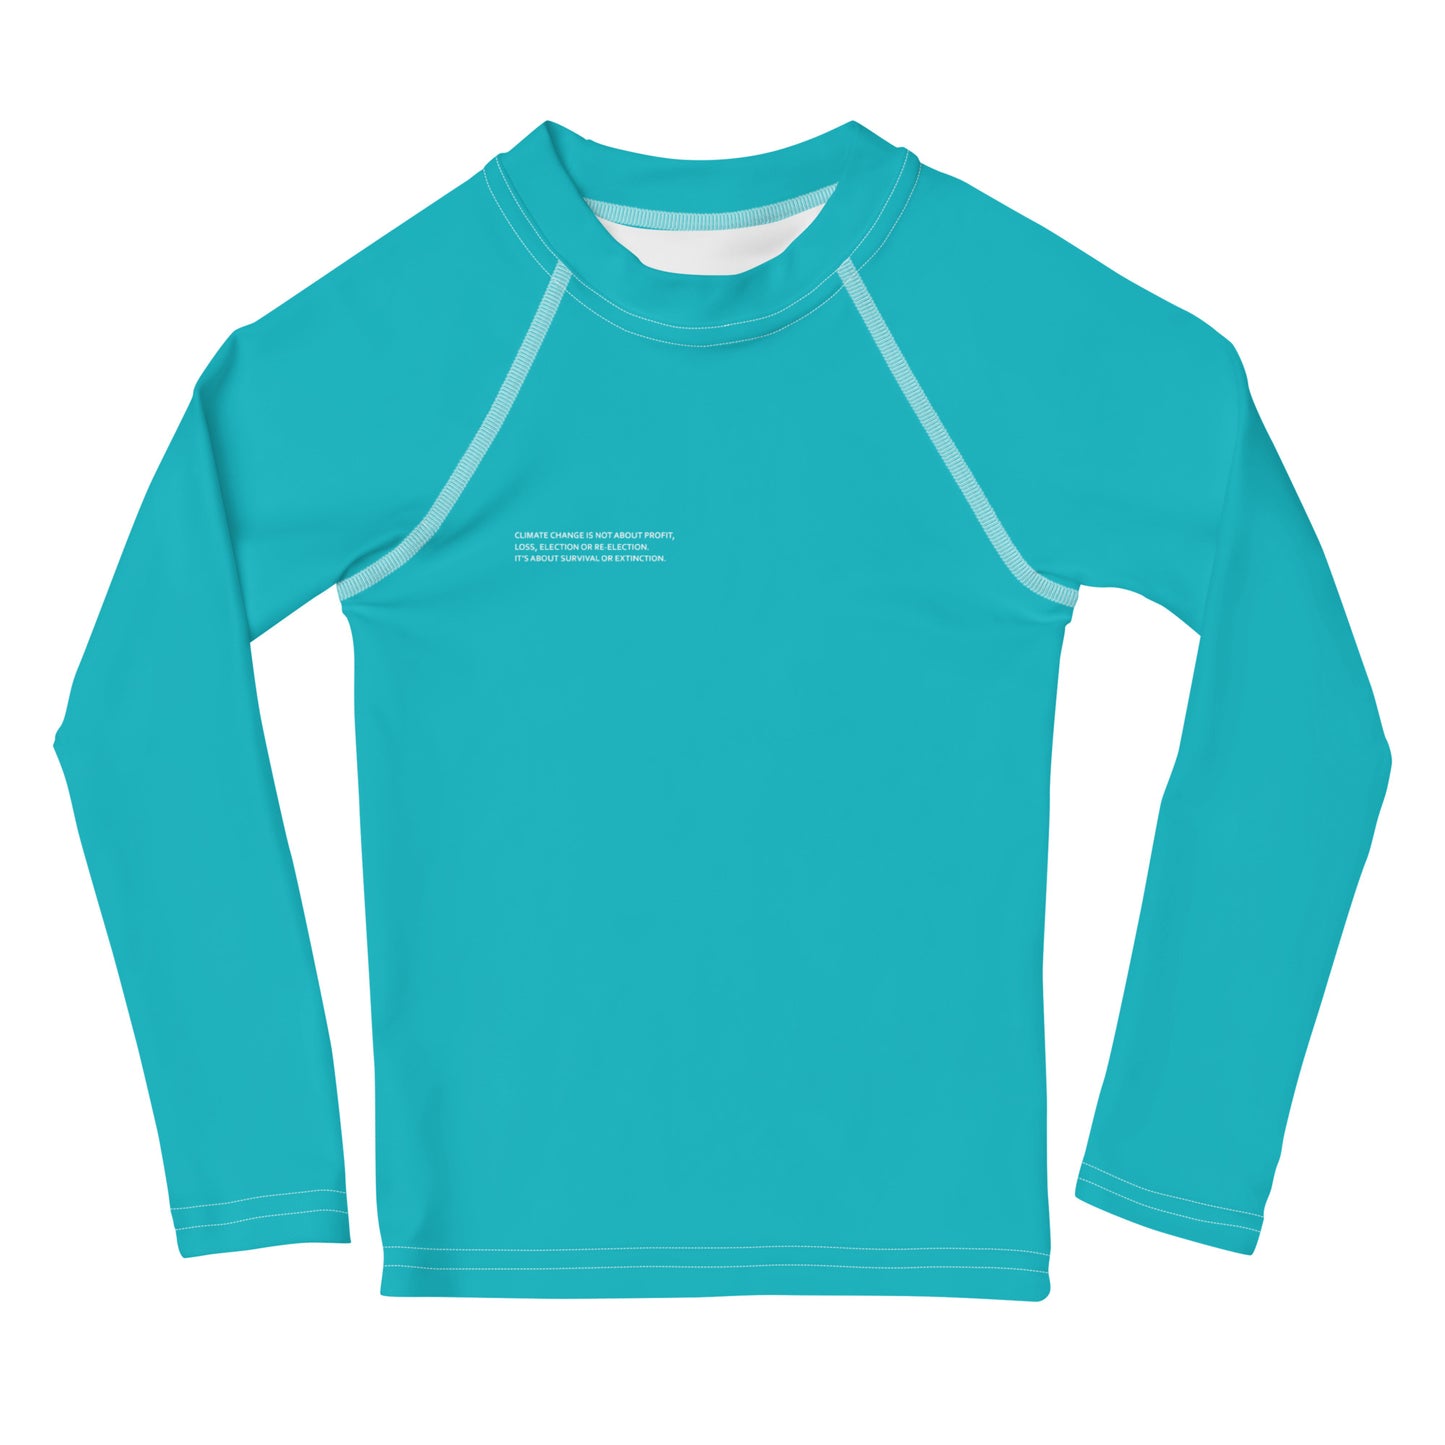 Cyan Climate Change Global Warming Statement - Sustainably Made Kid's Long Sleeve Tee